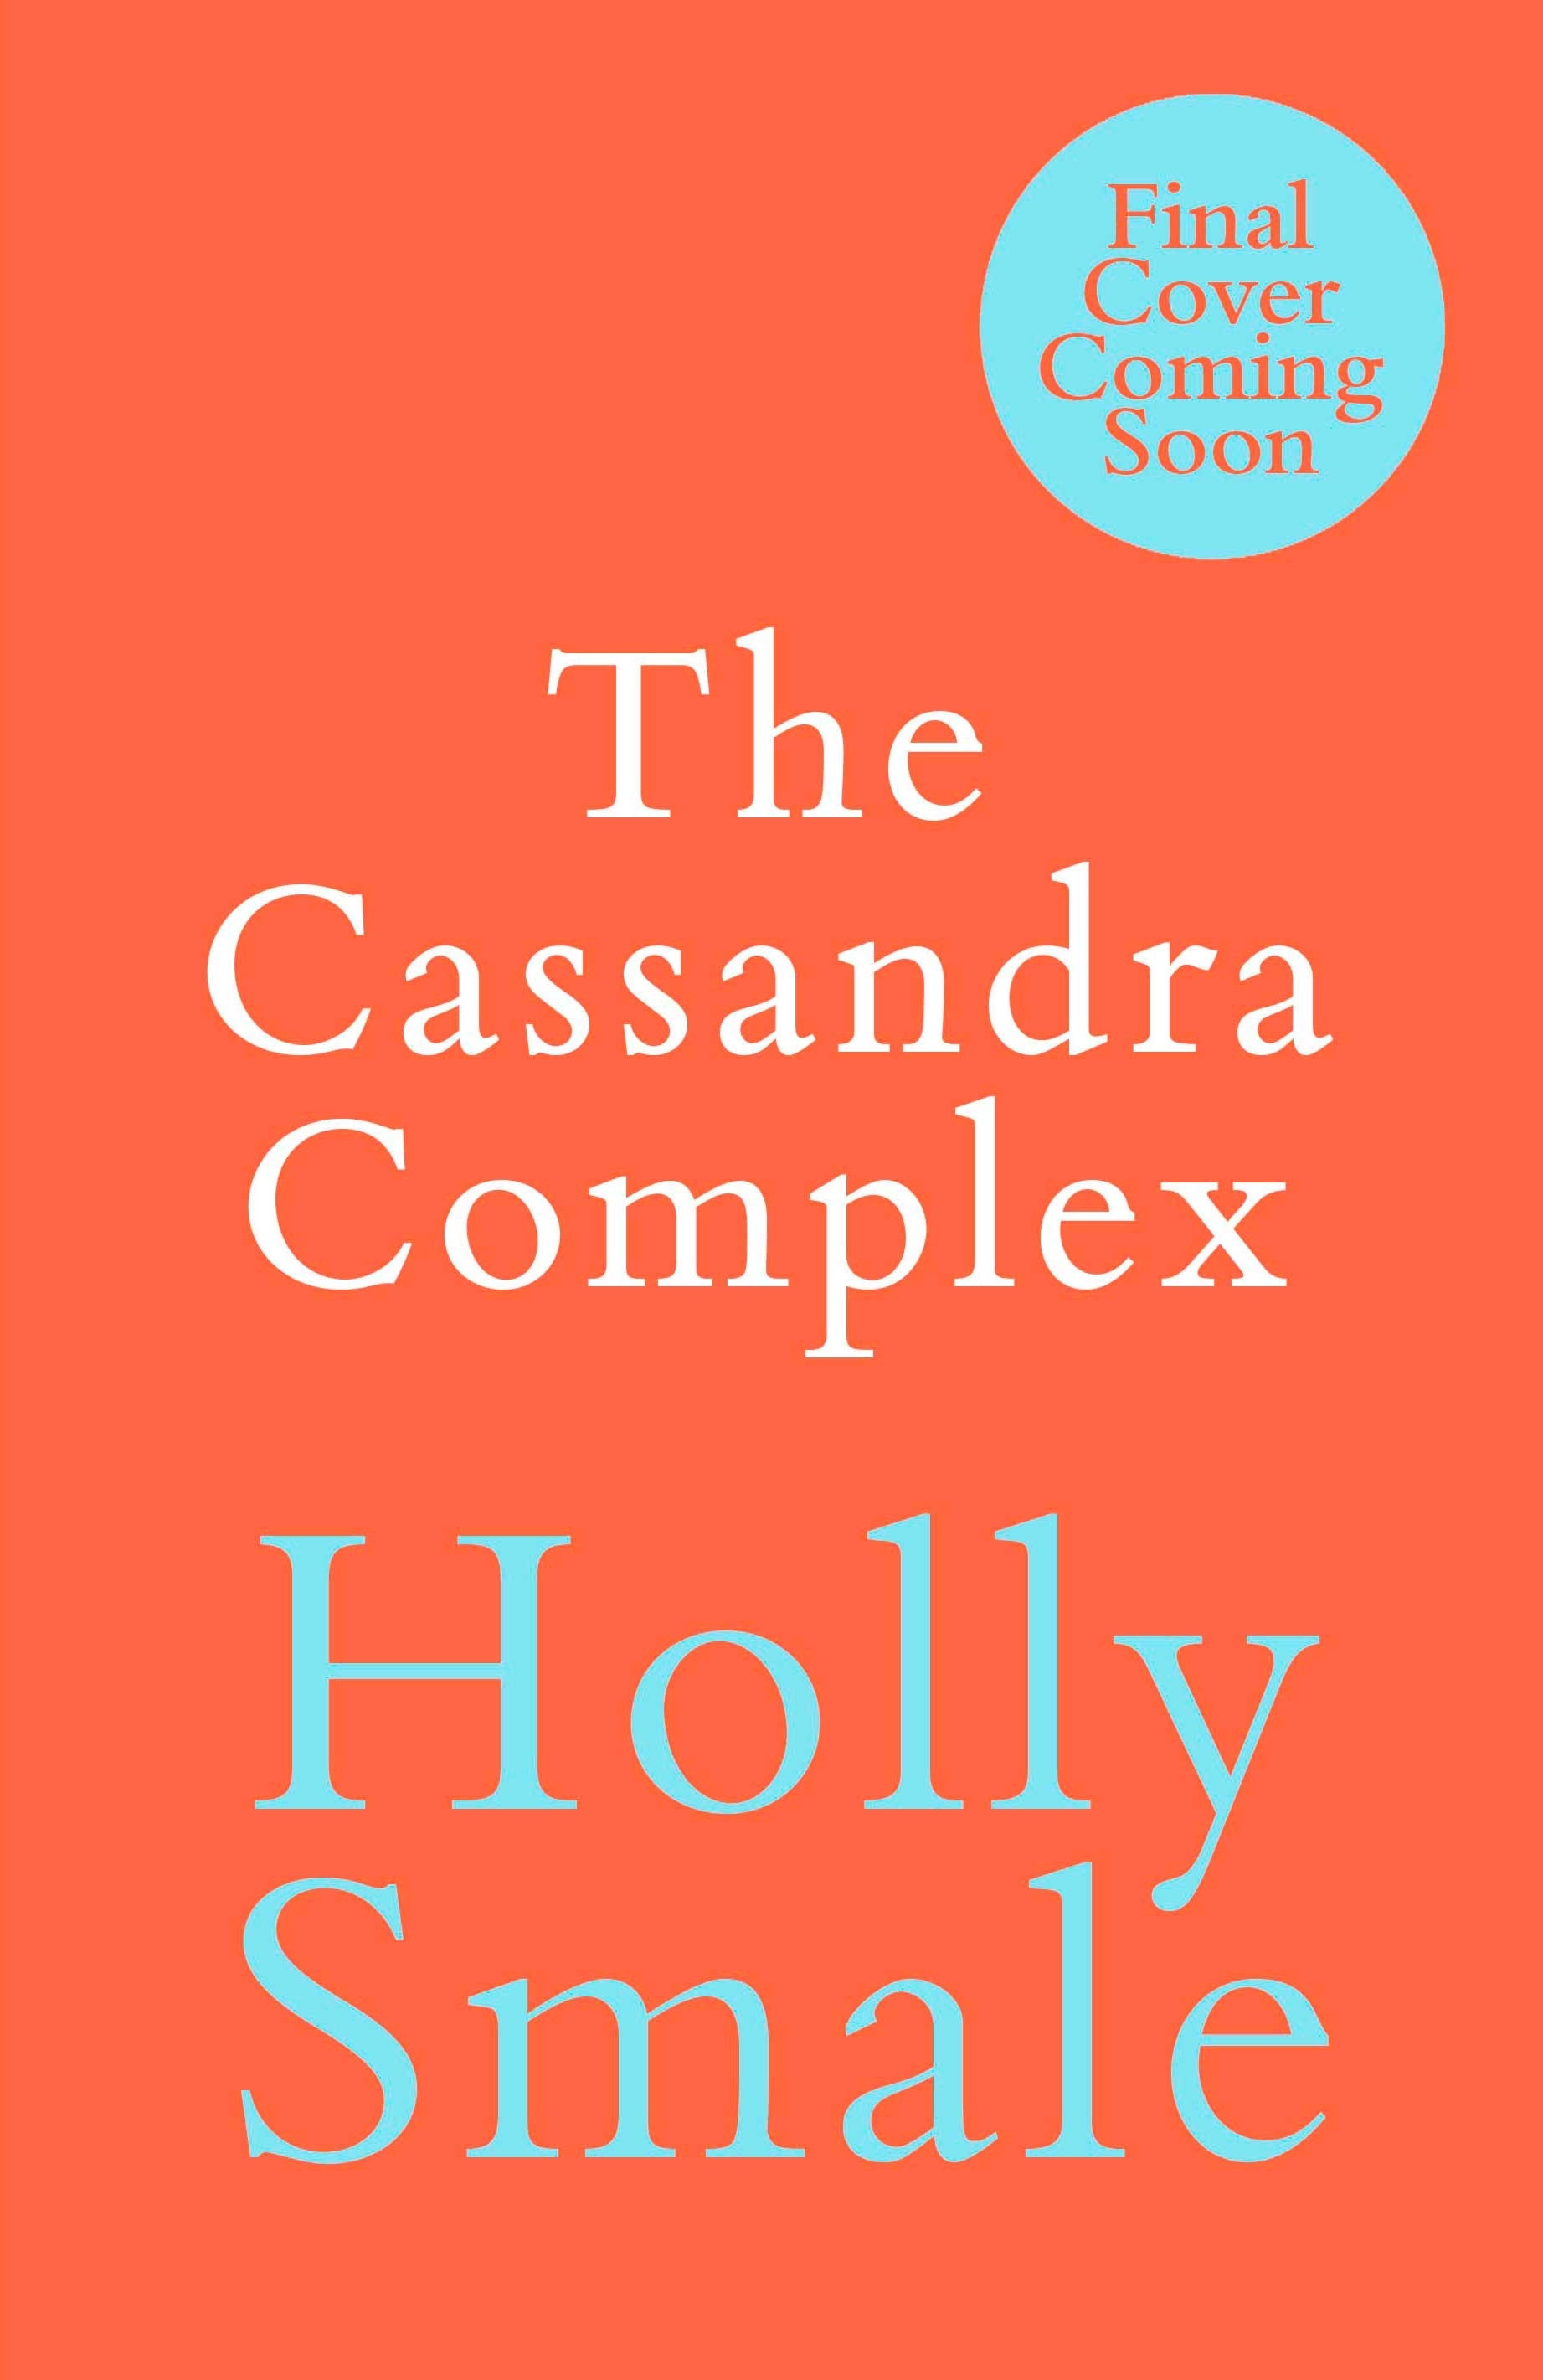 Book “The Cassandra Complex” by Holly Smale — May 11, 2023